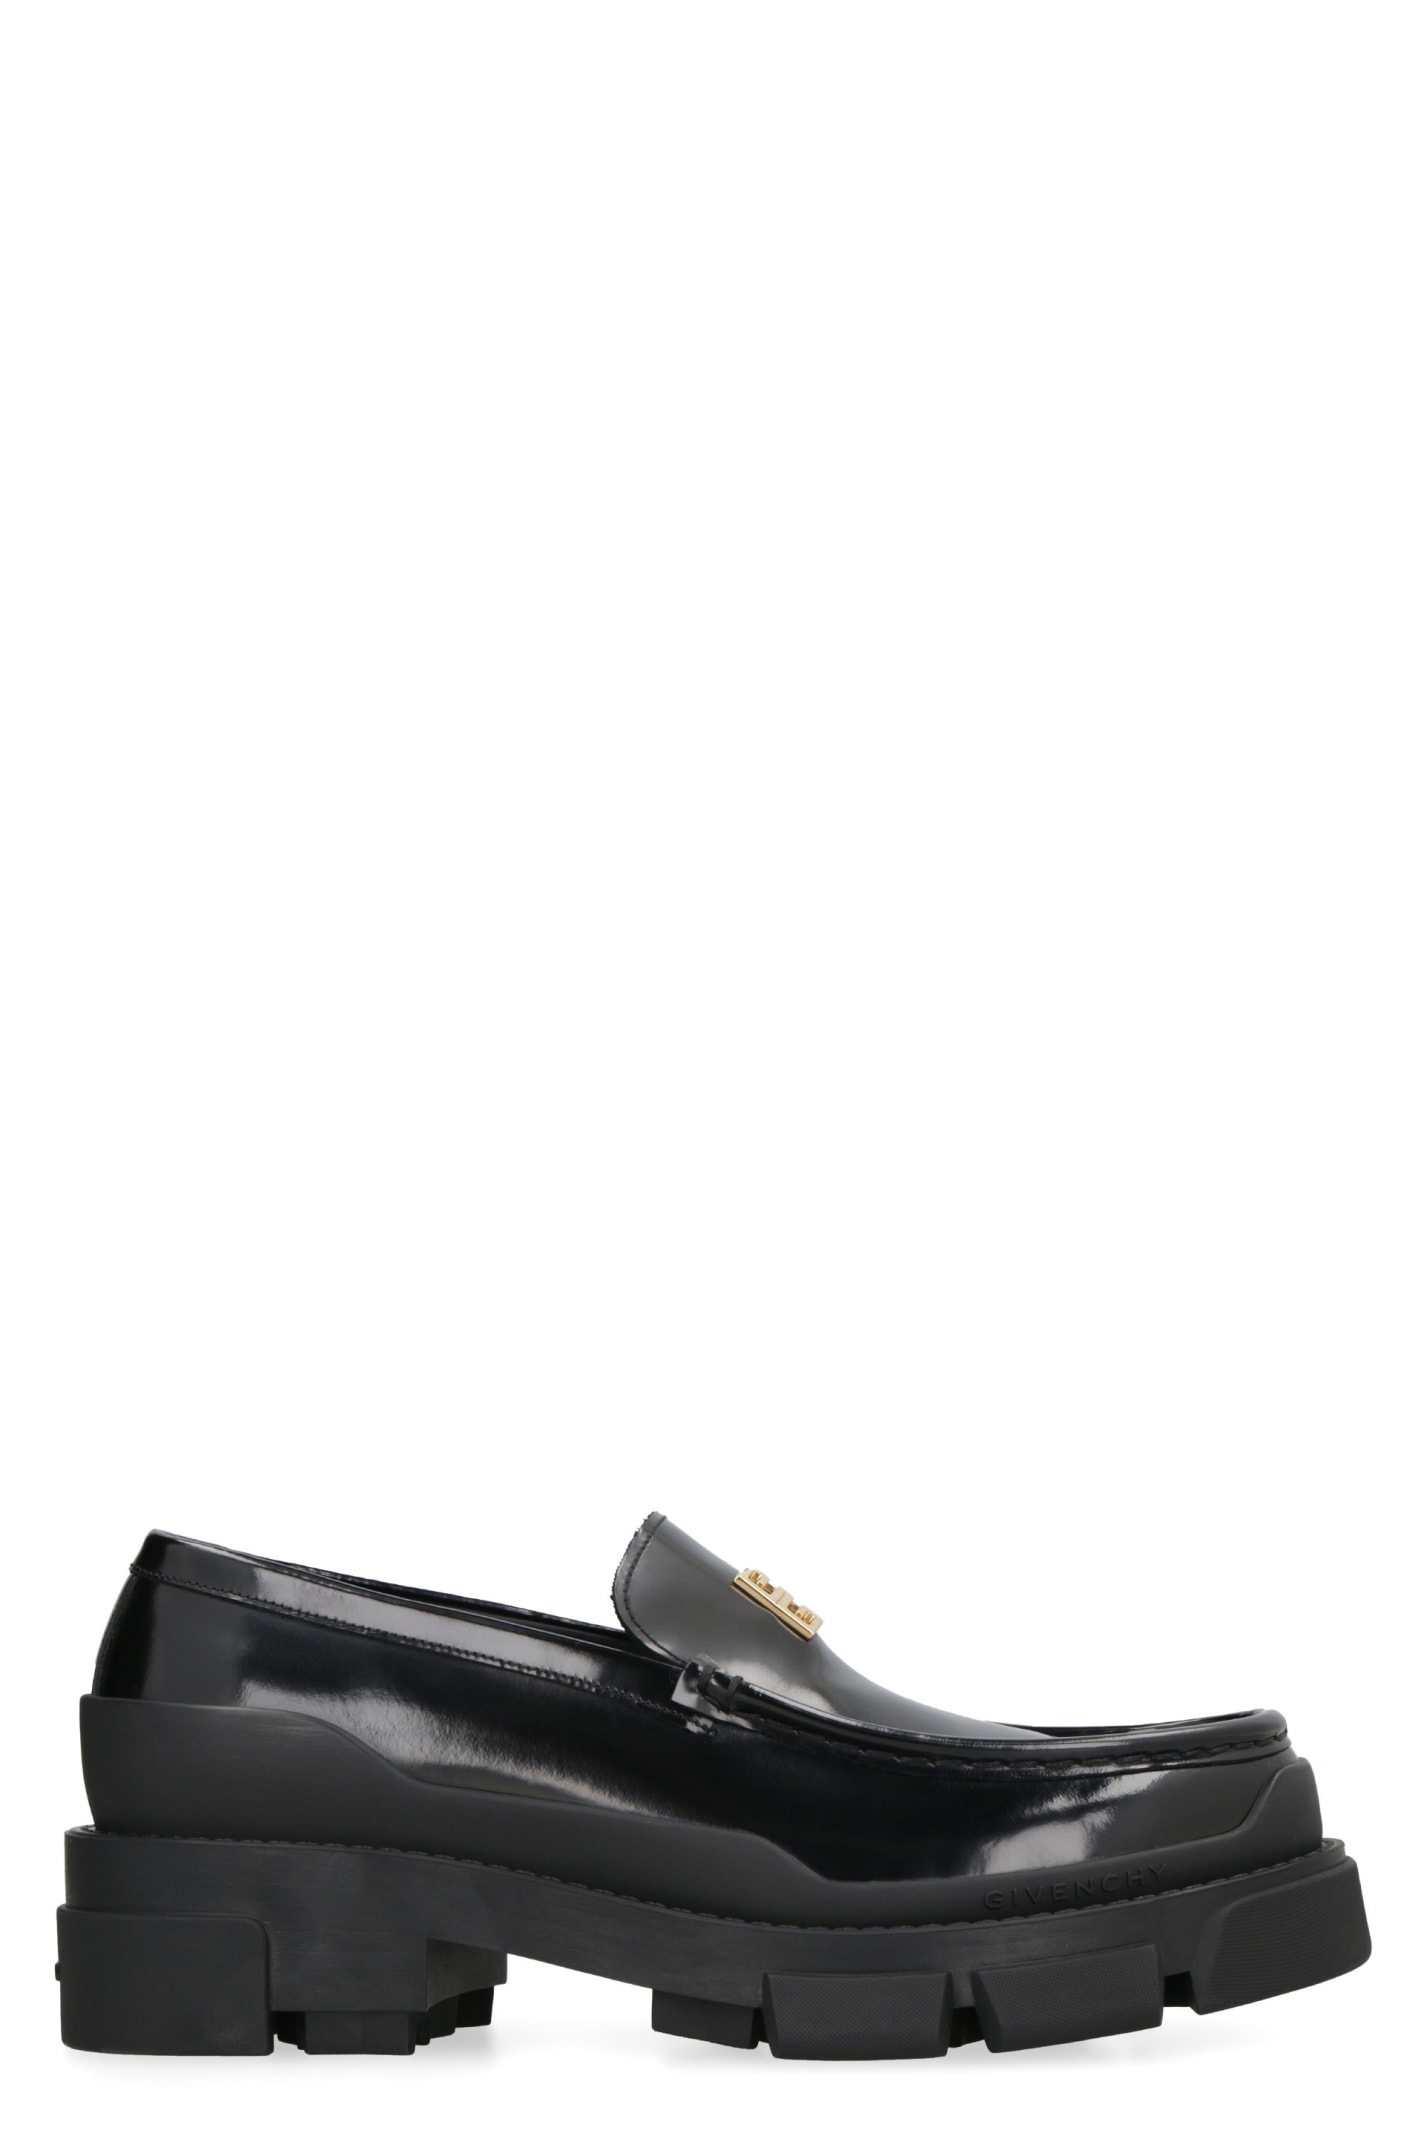 GIVENCHY TERRA LEATHER LOAFERS